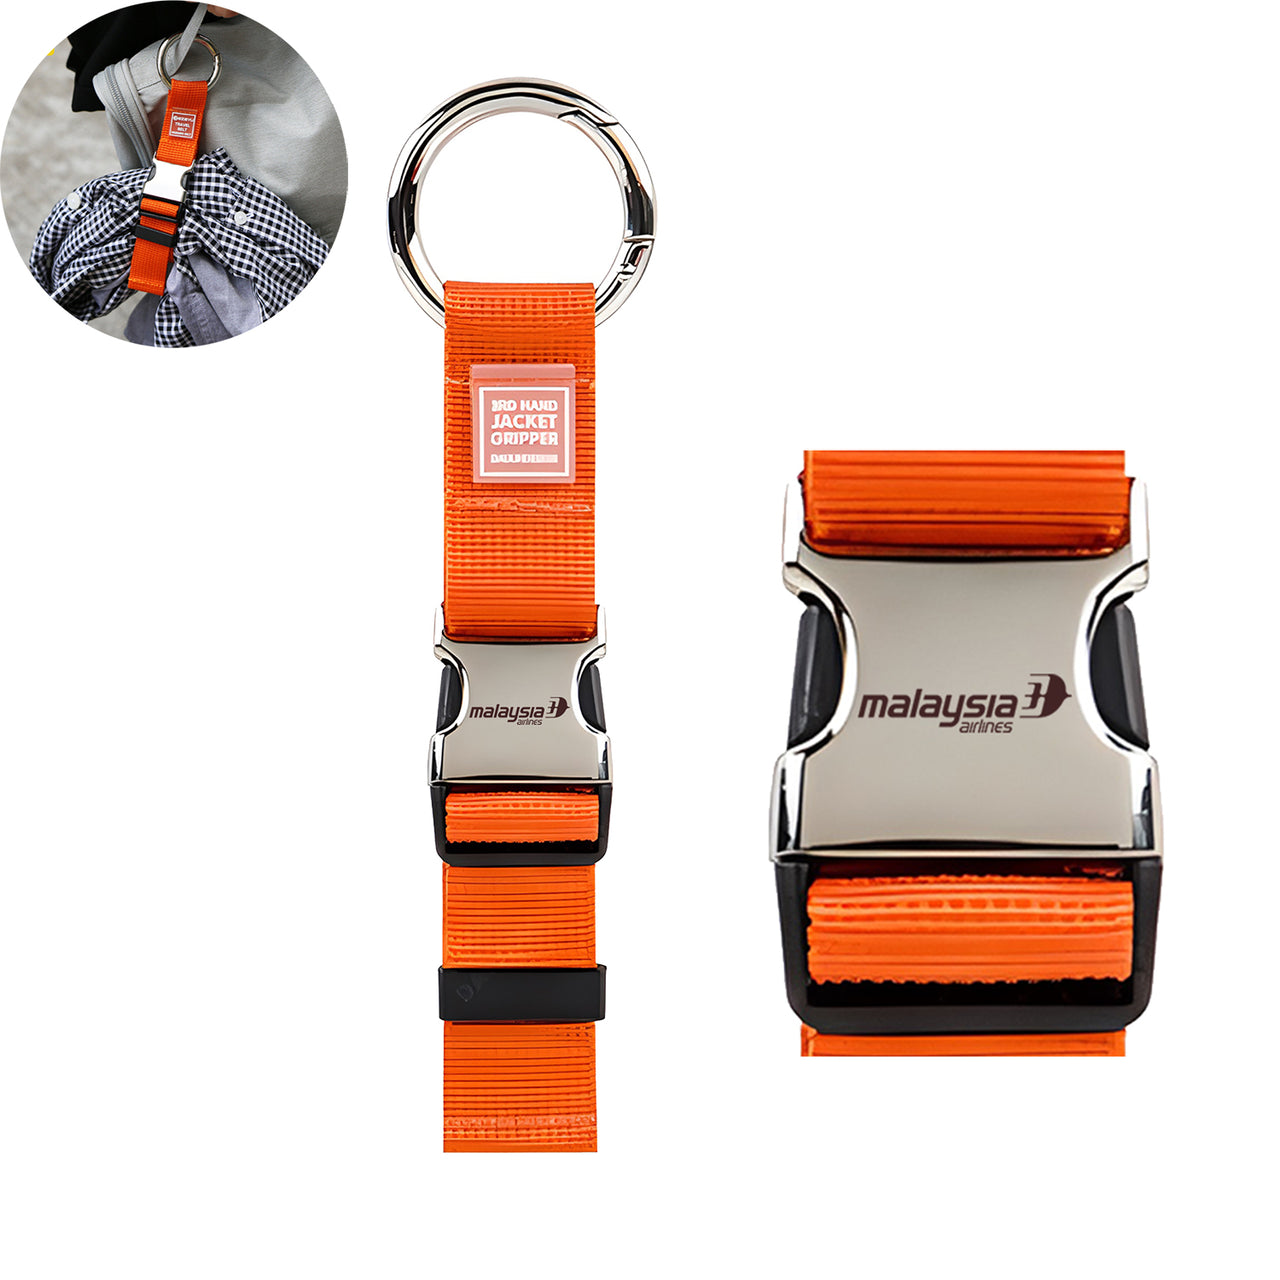 Malaysia Airlines Designed Portable Luggage Strap Jacket Gripper